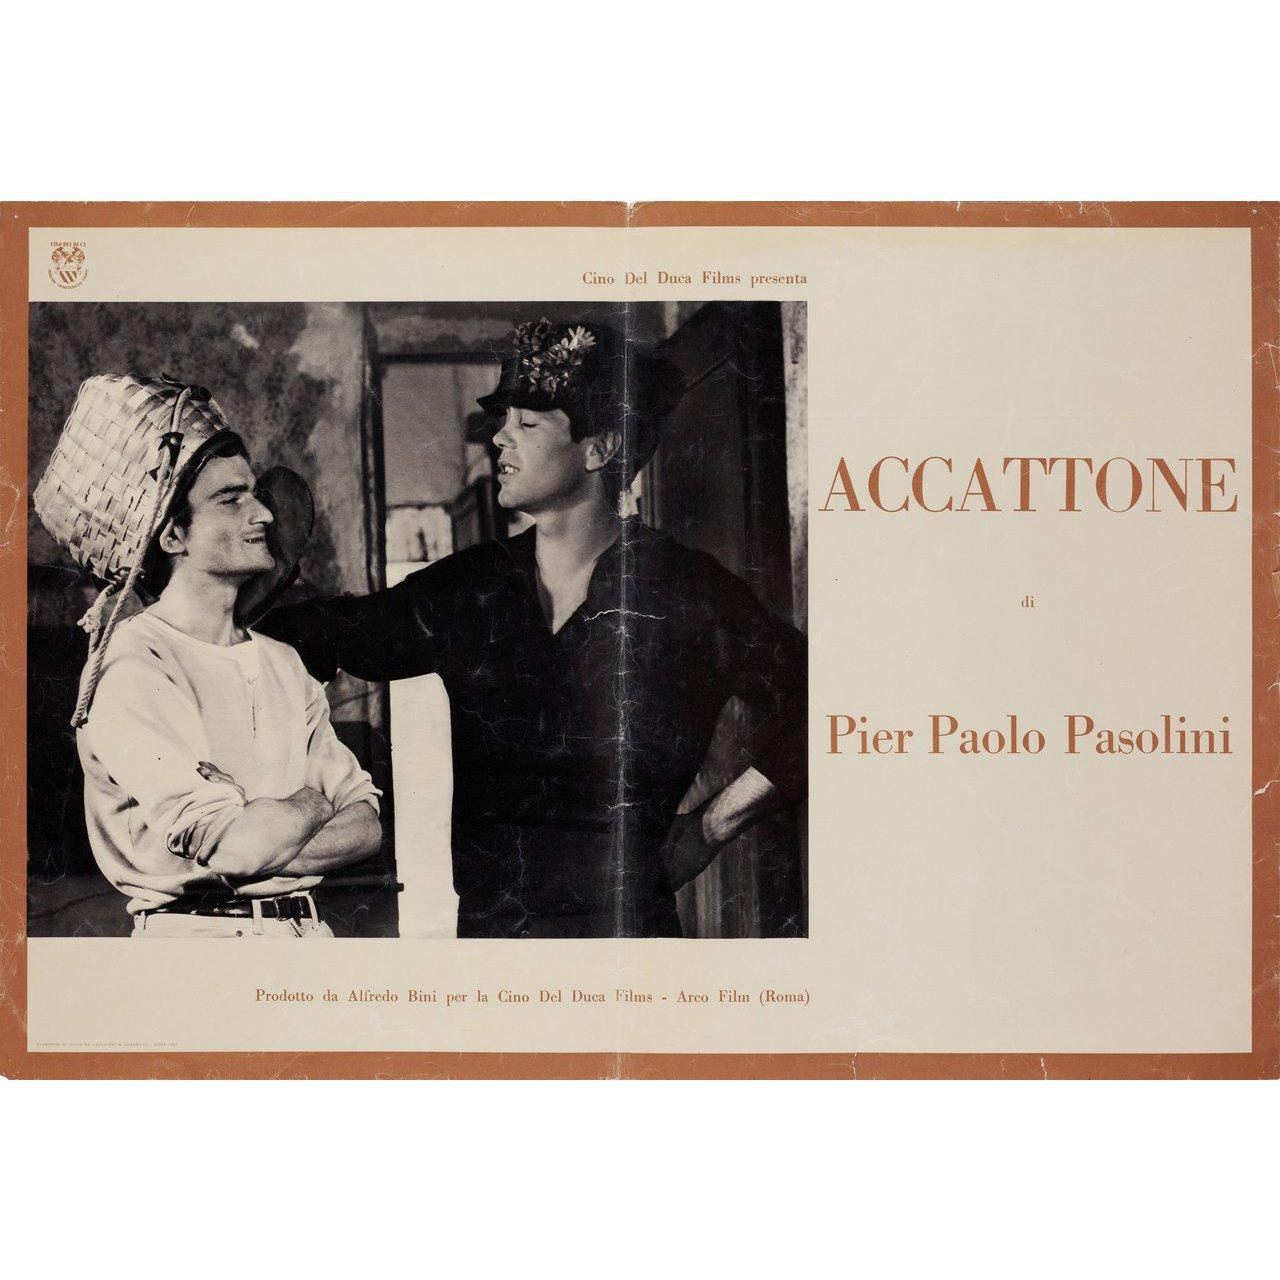 Original 1961 Italian fotobusta poster for the film Accattone directed by Pier Paolo Pasolini with Franco Citti / Franca Pasut / Silvana Corsini / Paola Guidi. Good-Very Good condition, folded with edge & fold wear. Many original posters were issued